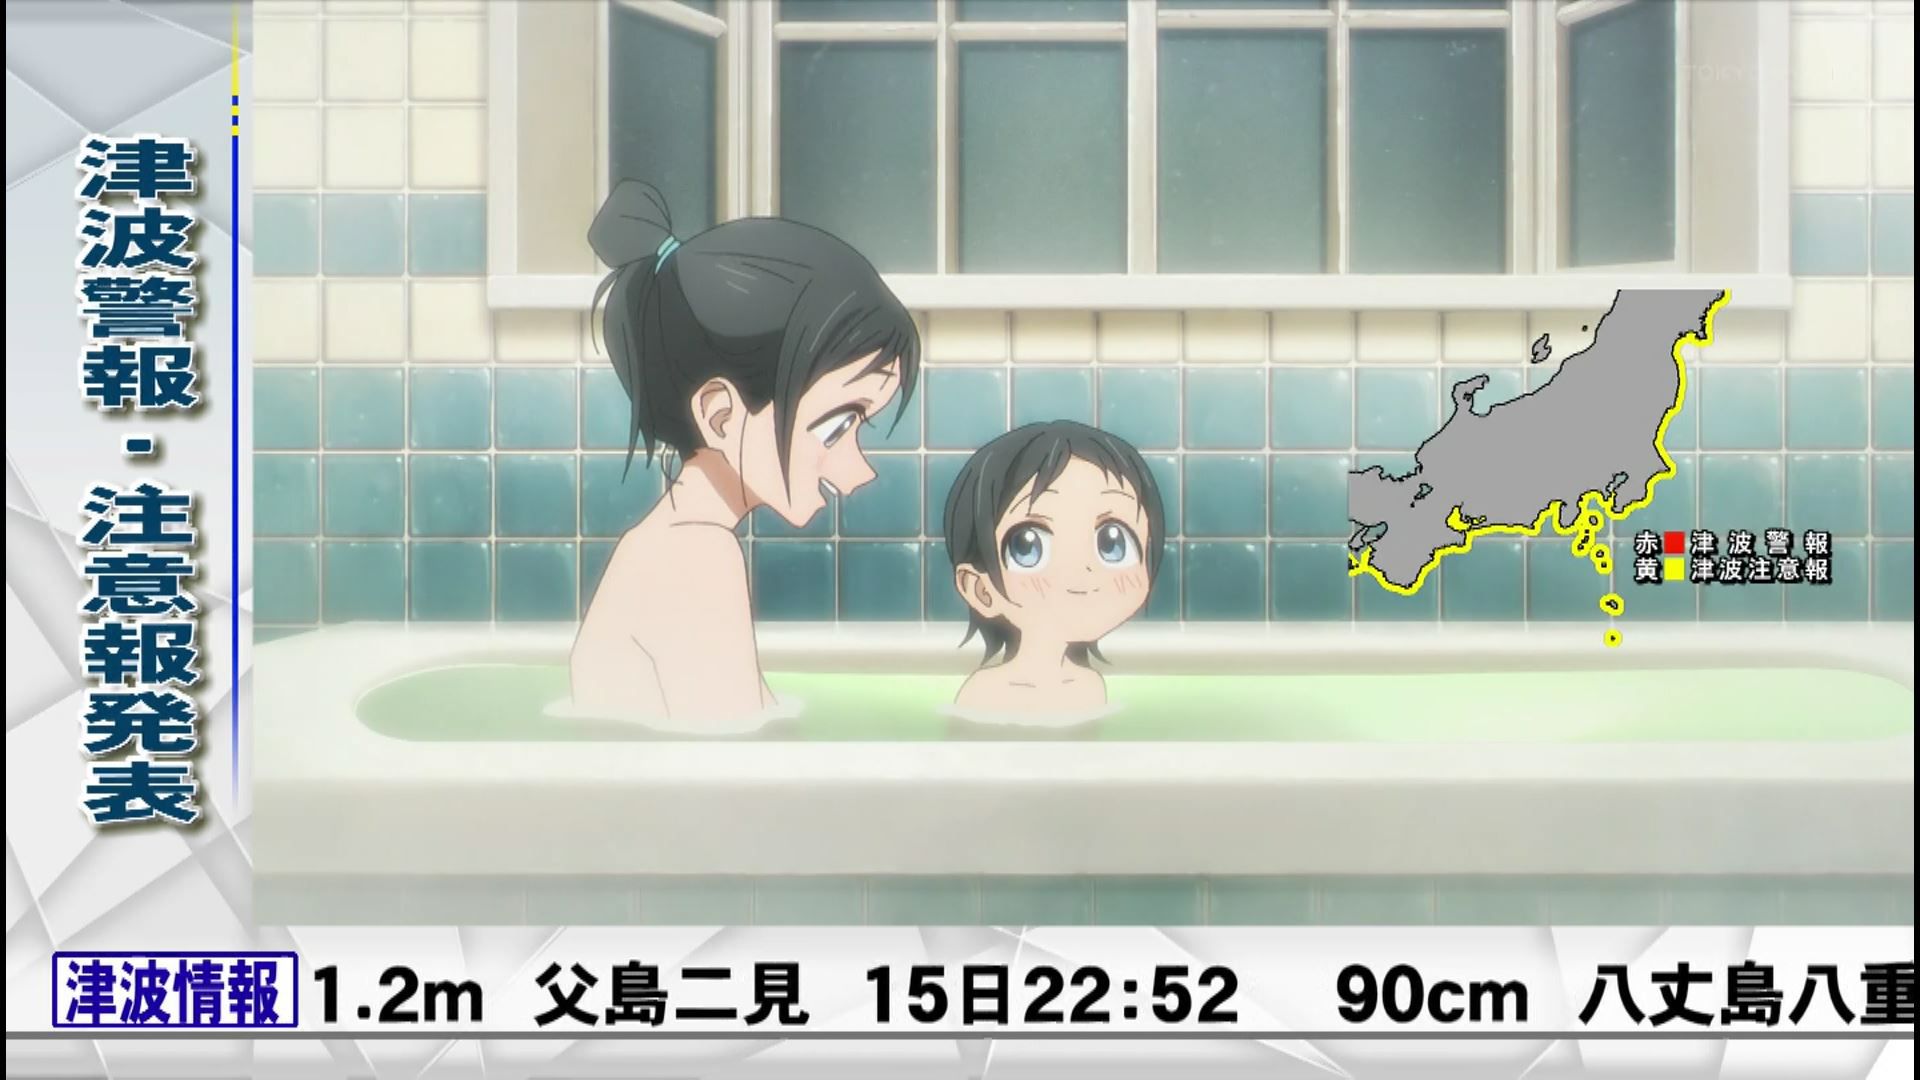 In the anime "Tomorrow-chan's Sailor Suit" episode 2, the girl's erotic bathing scene and the punchy scene 16